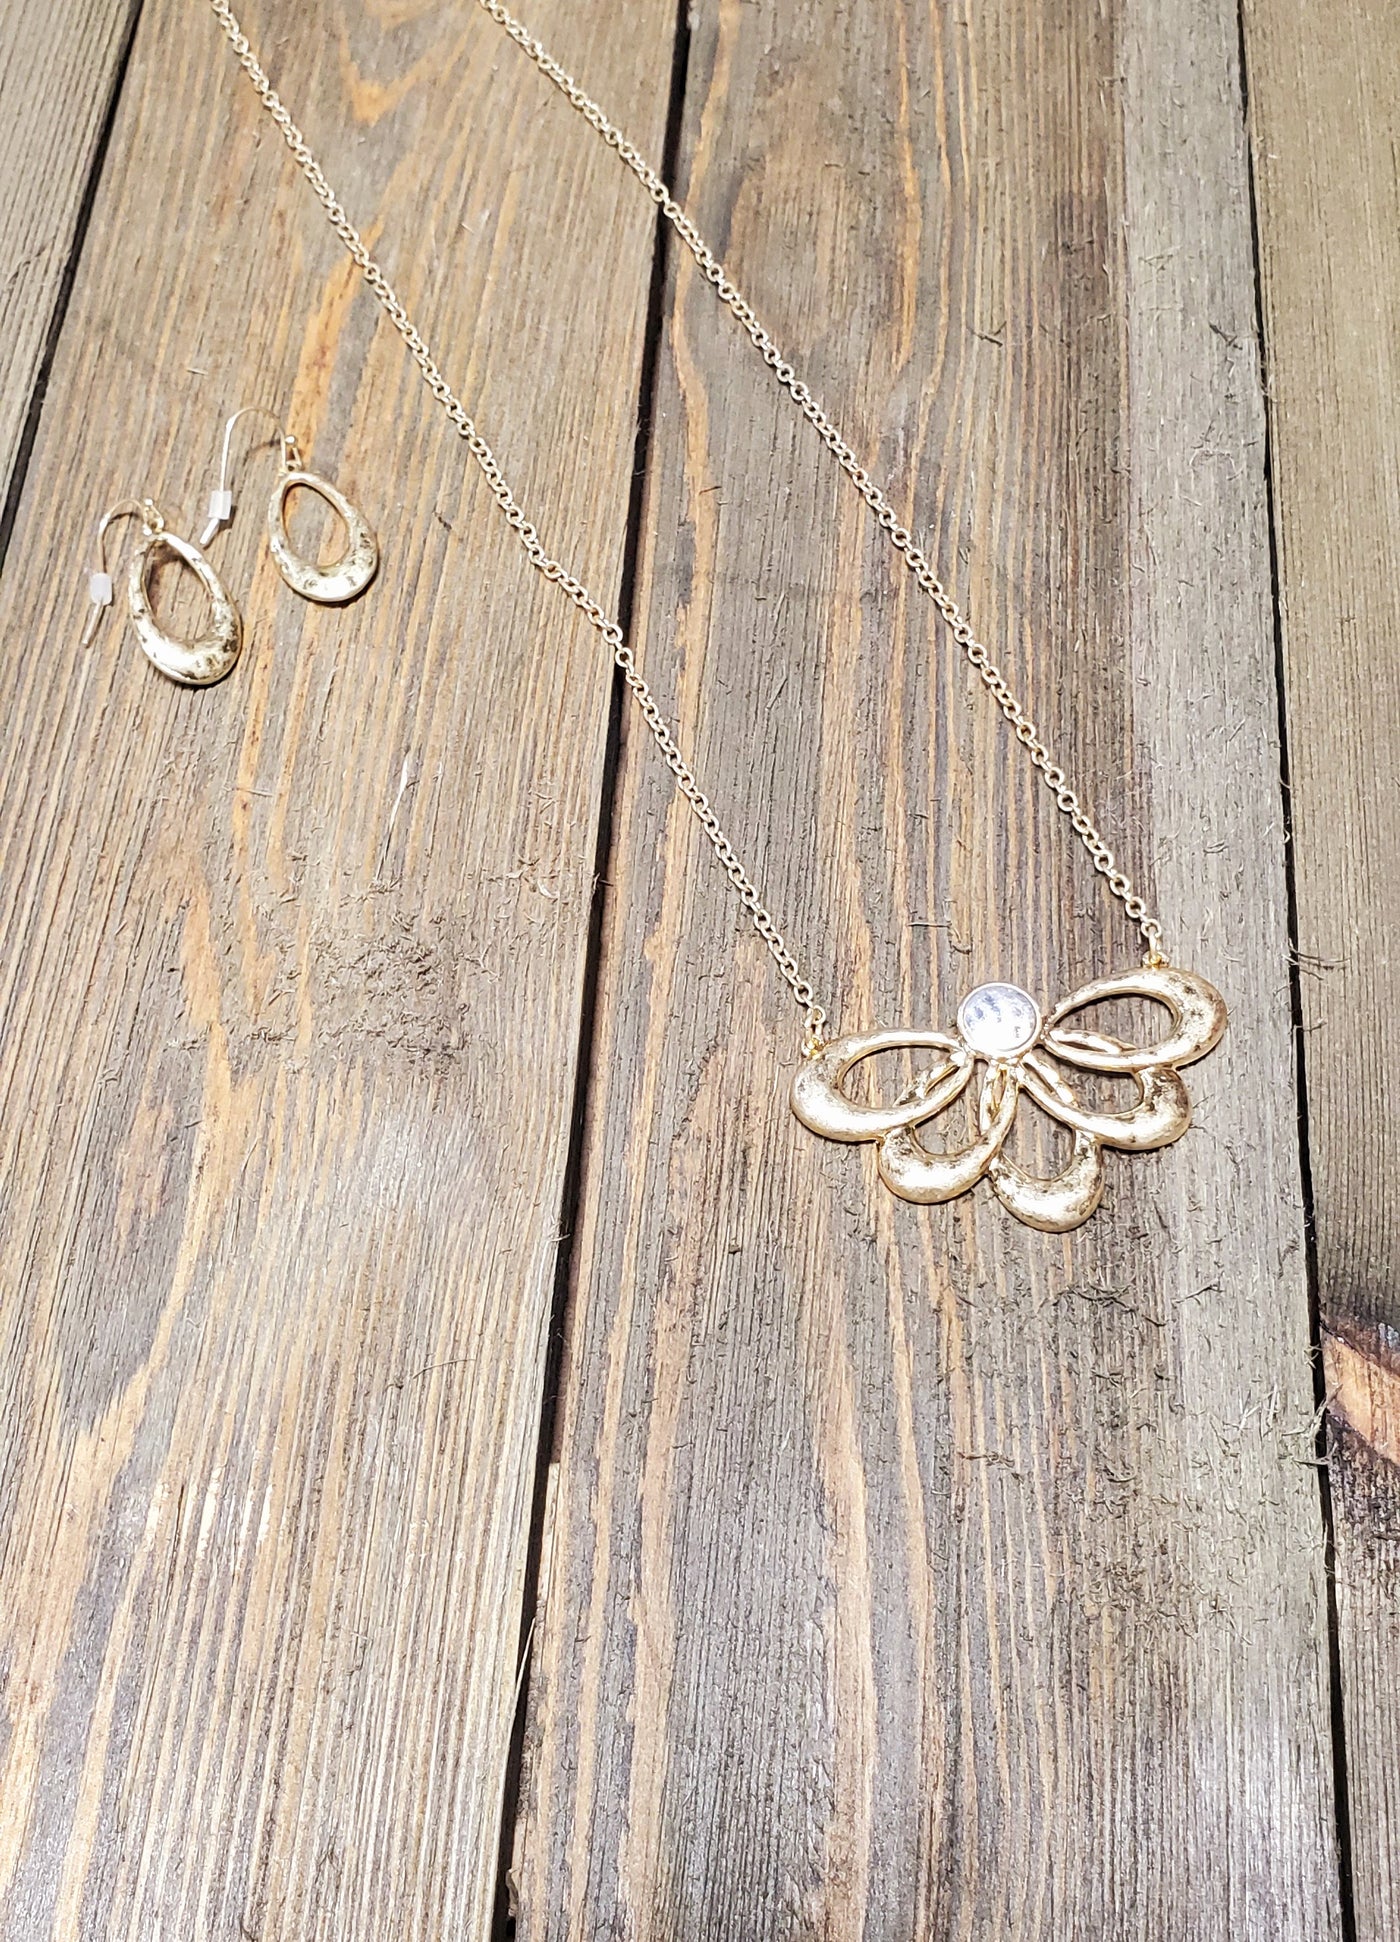 Gold Half Flower Necklace / Earring Set-120 Jewelry-Ethel and Myrtle Inc-Market Street Nest, Fashionable Clothing, Shoes and Home Décor Located in Mabank, TX